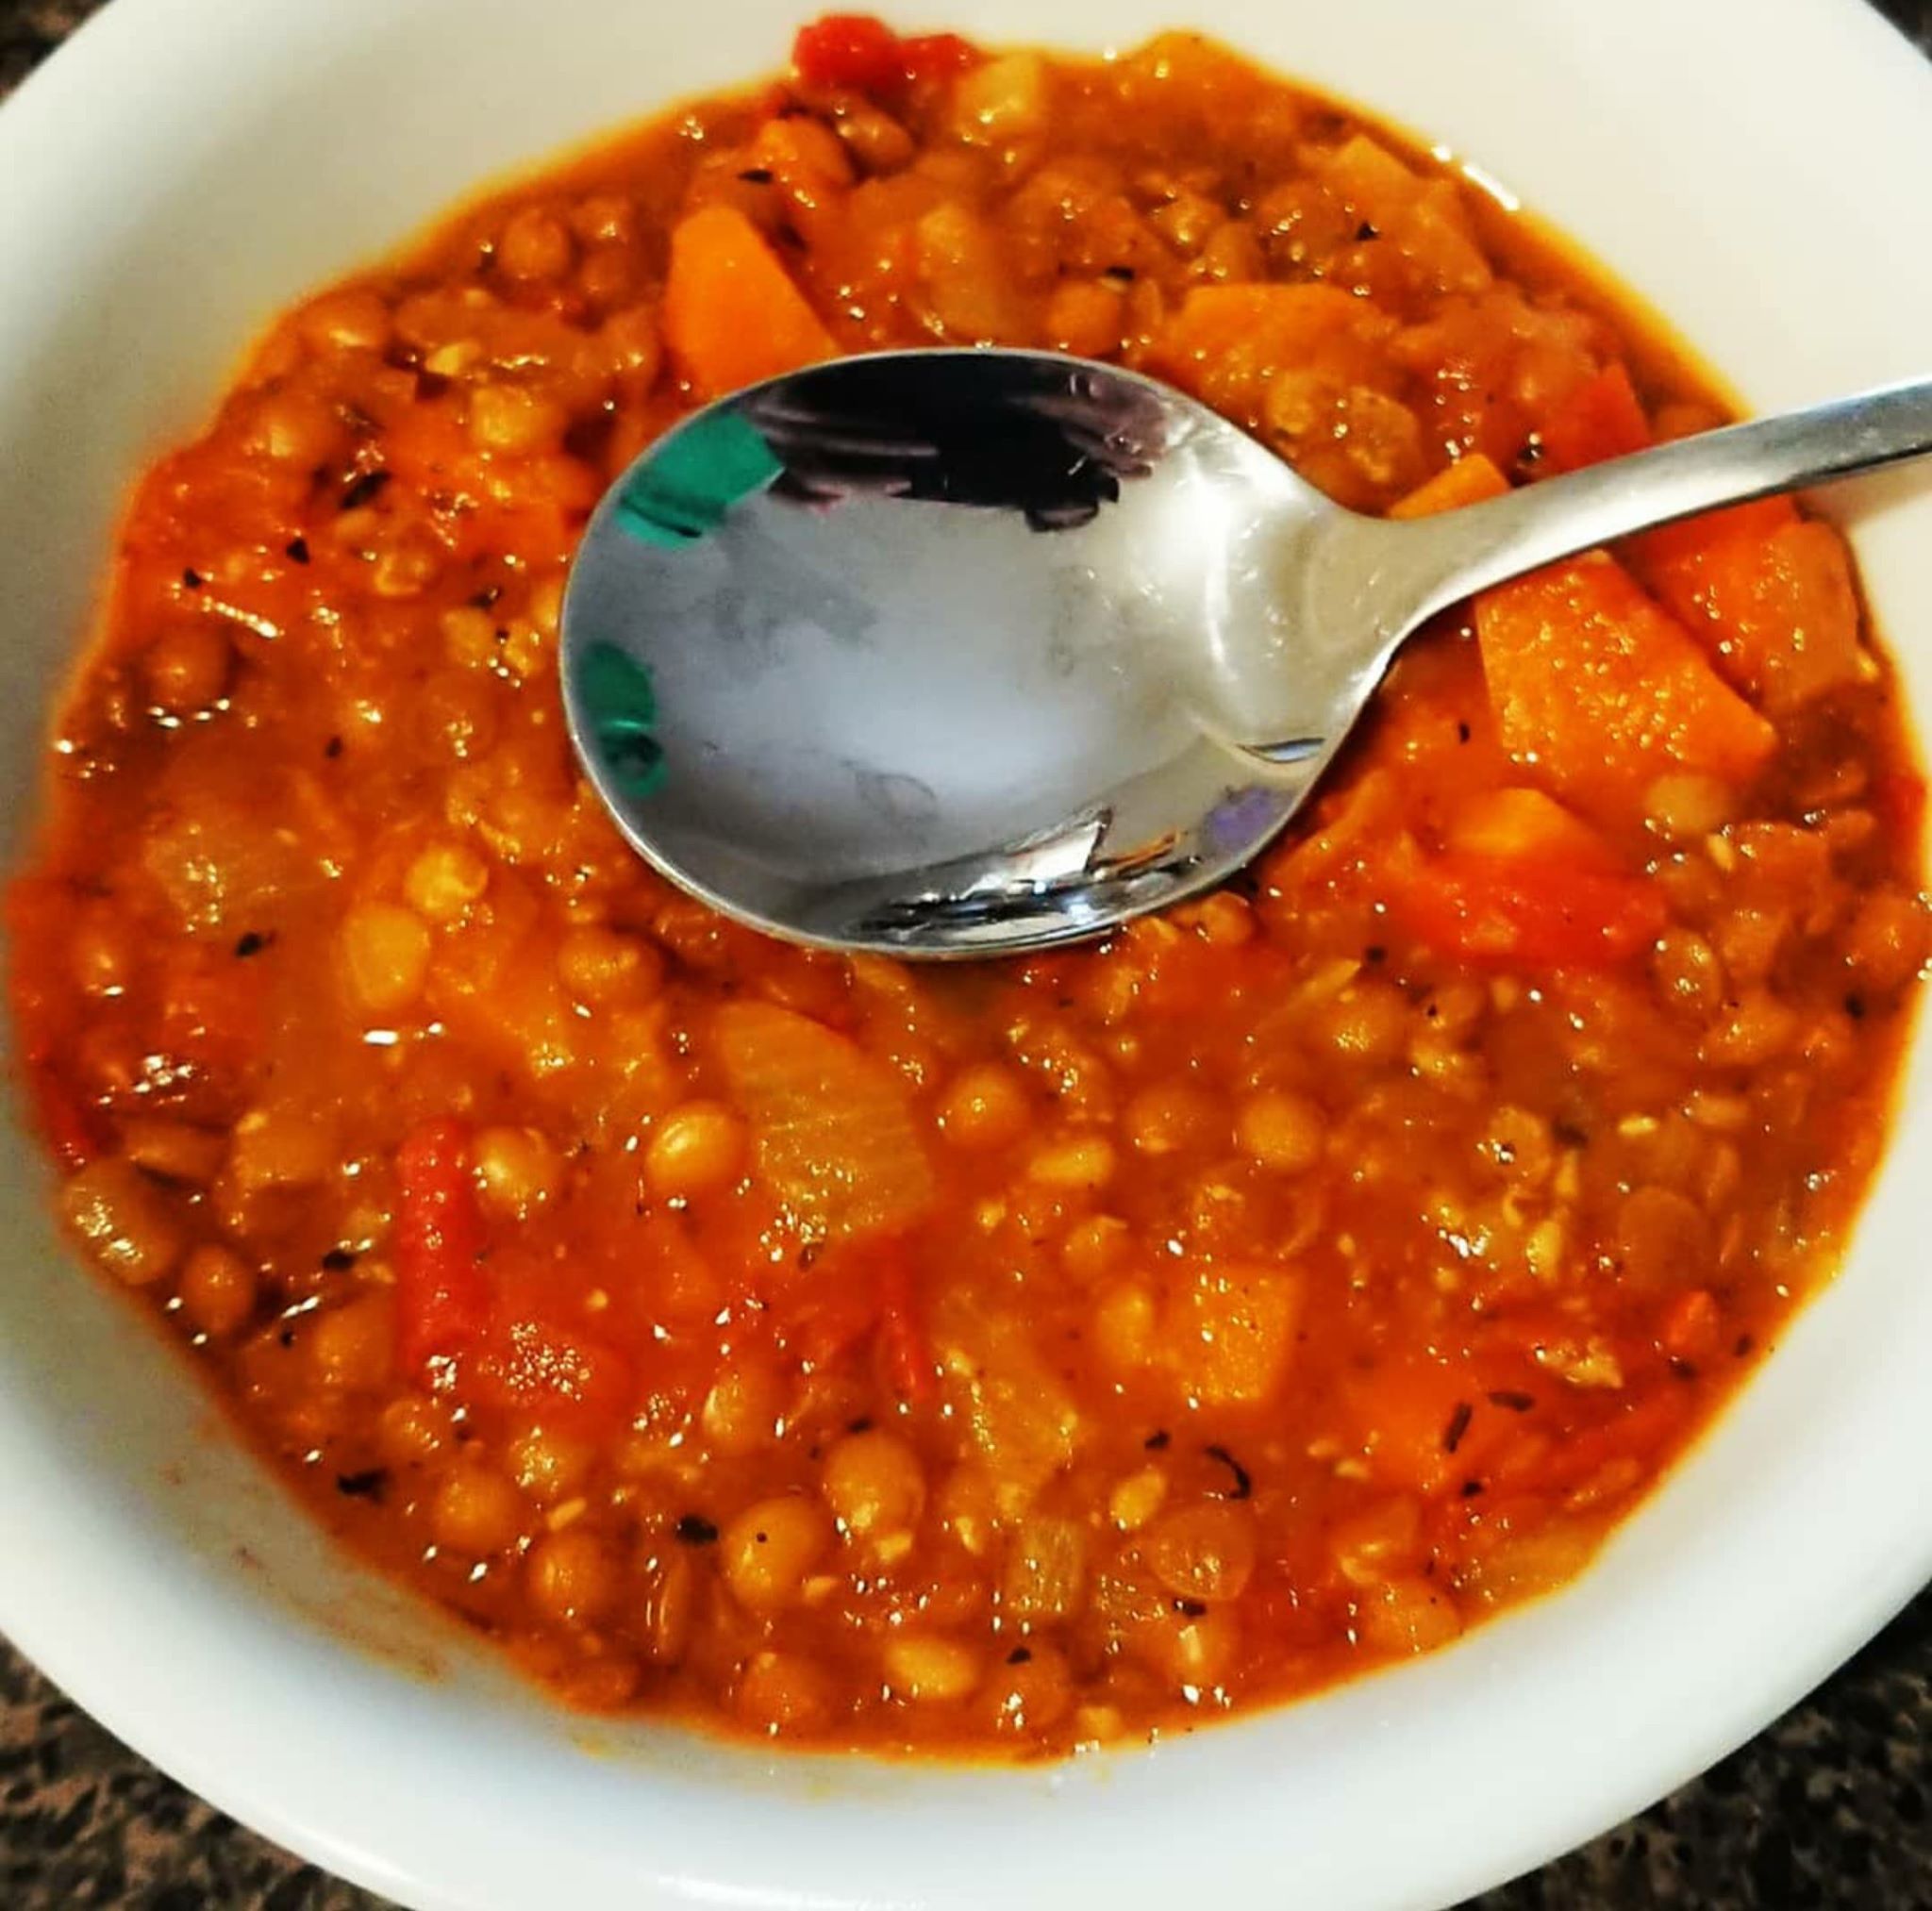 Curried Lentil and Tomato Stew